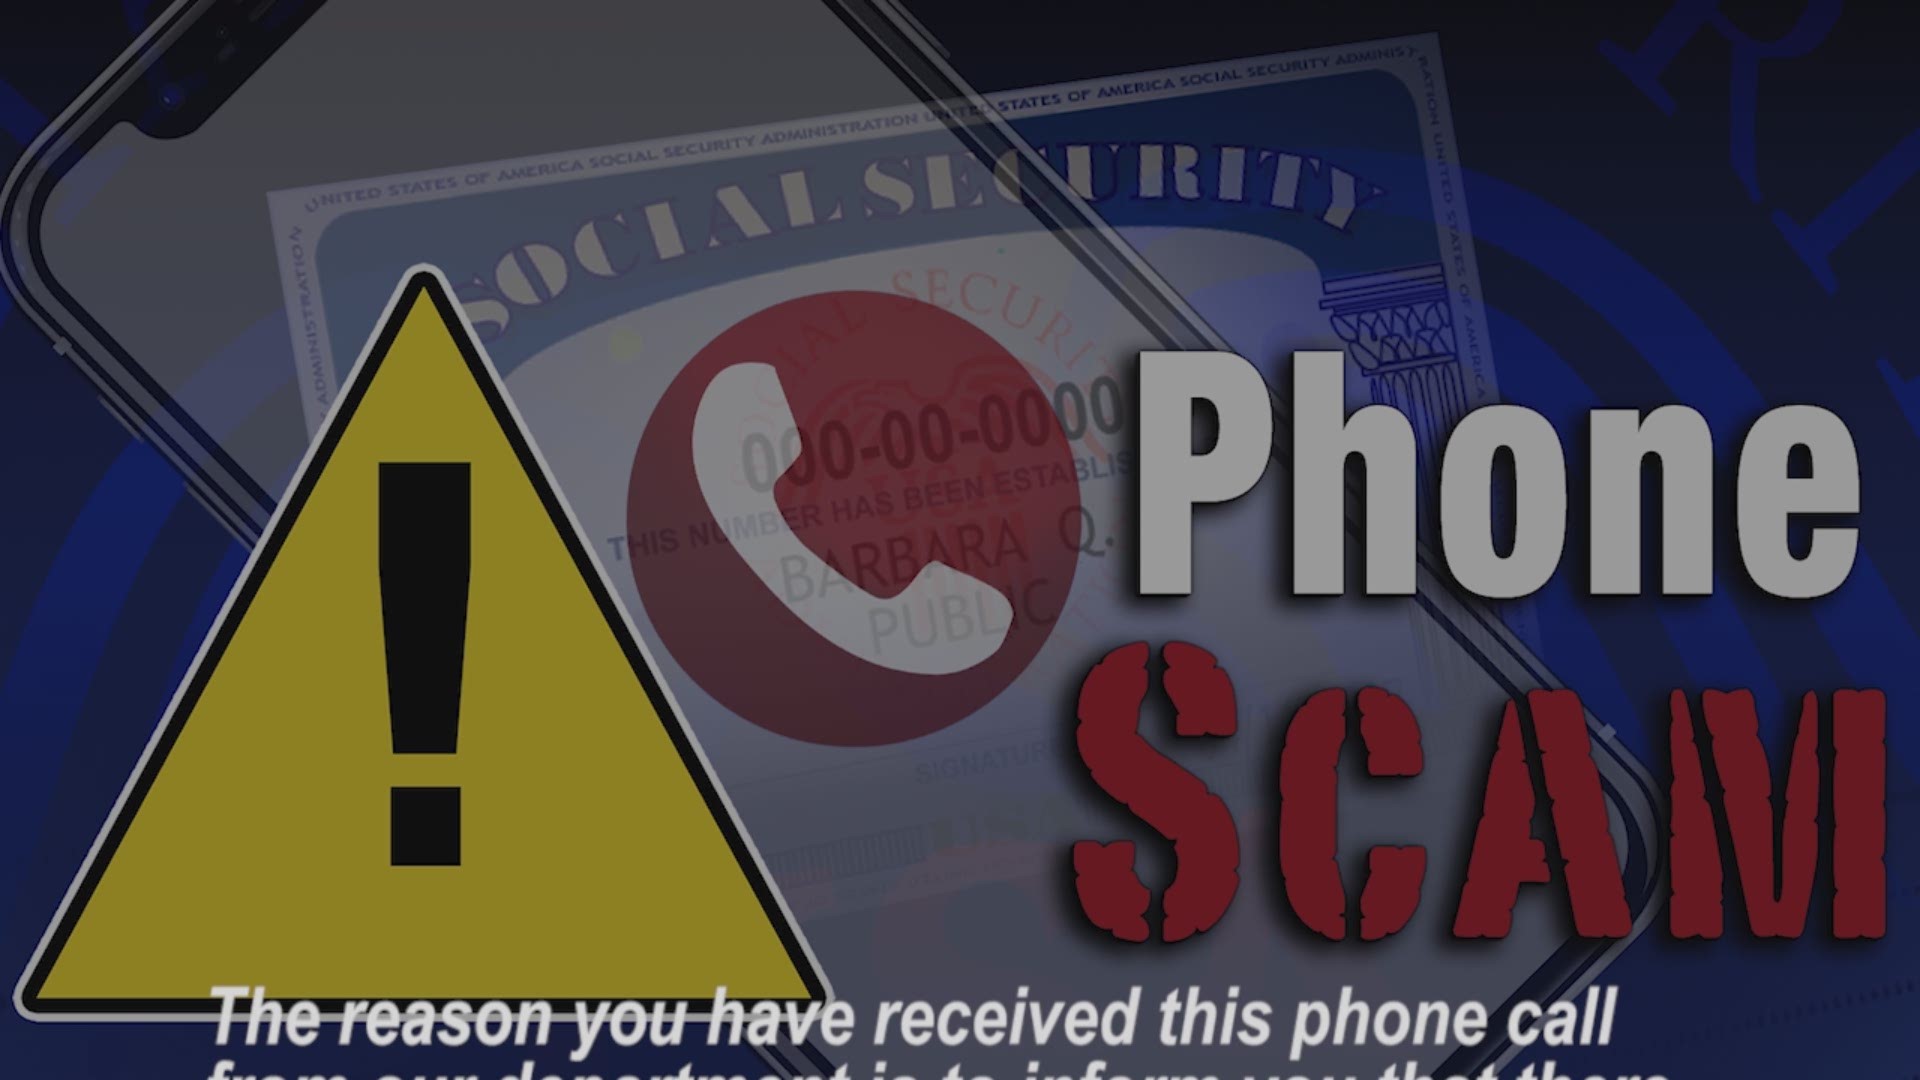 A new phone scam says fraudulent activities have been filed on your social security number.